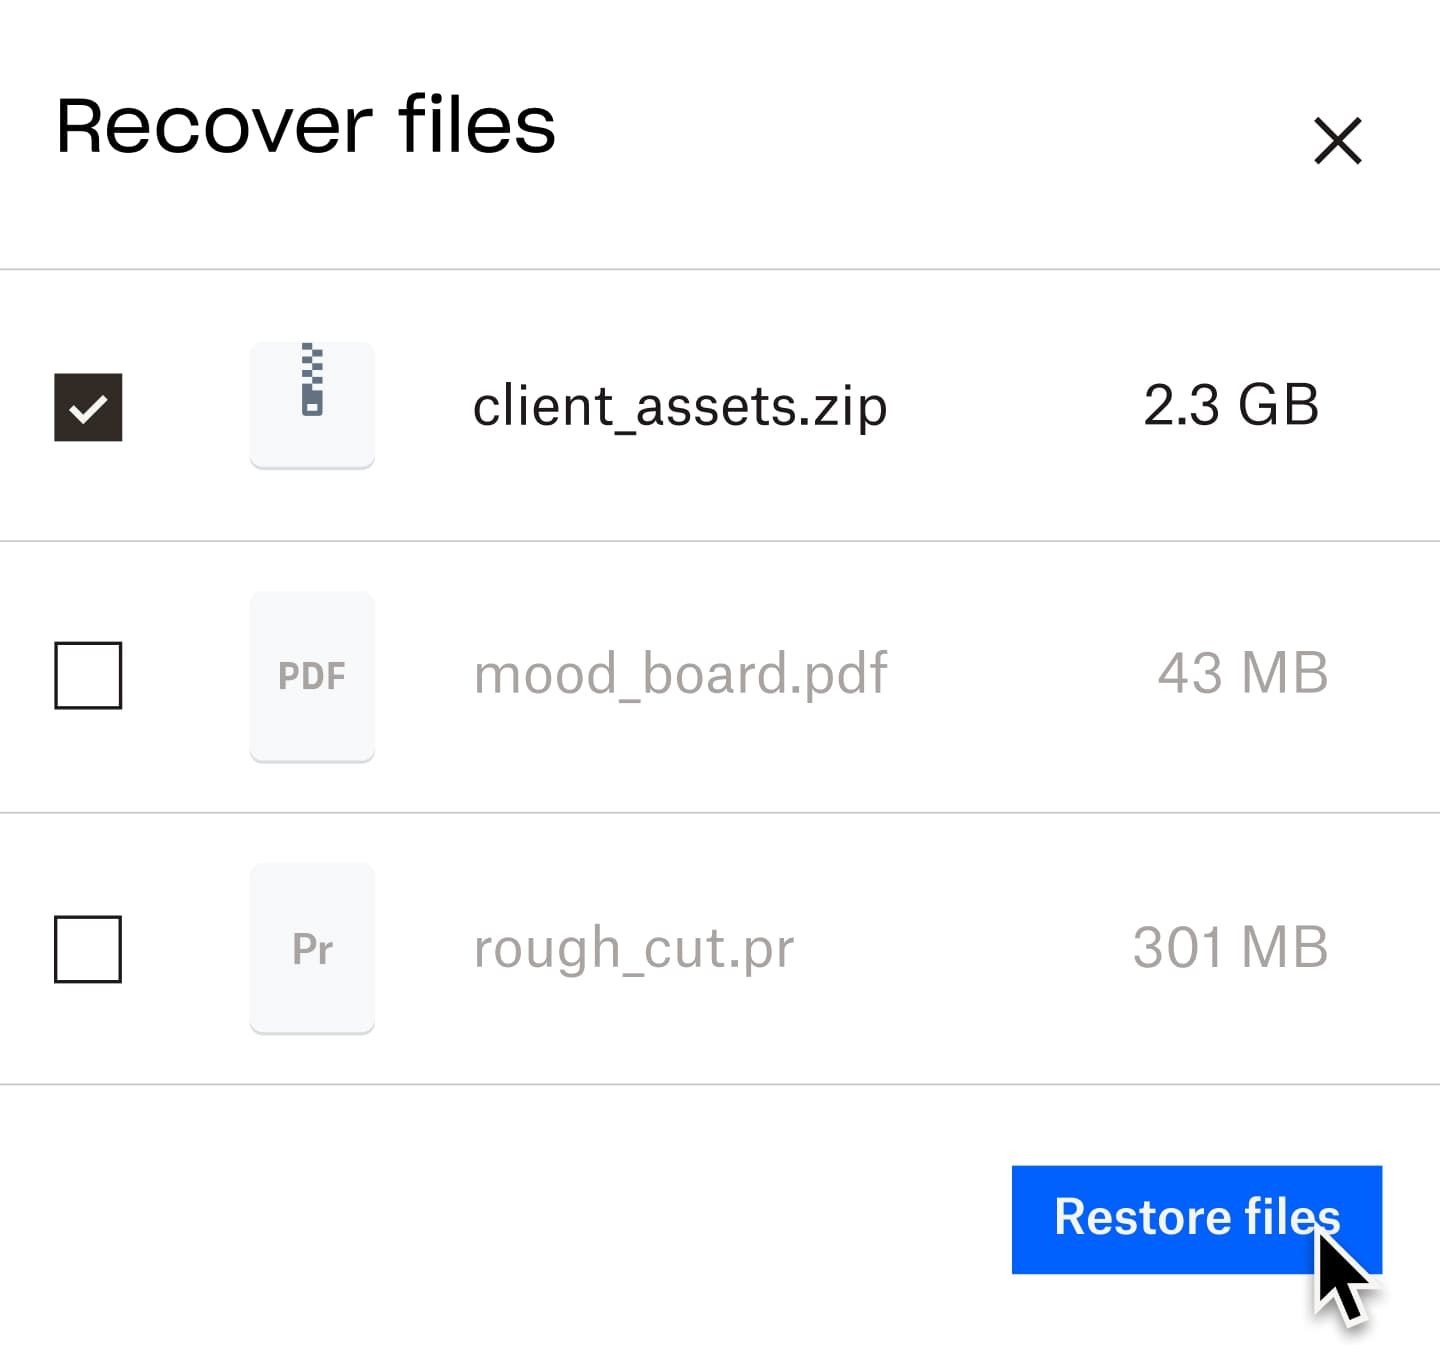 A user clicking on a blue button labeled “restore files”